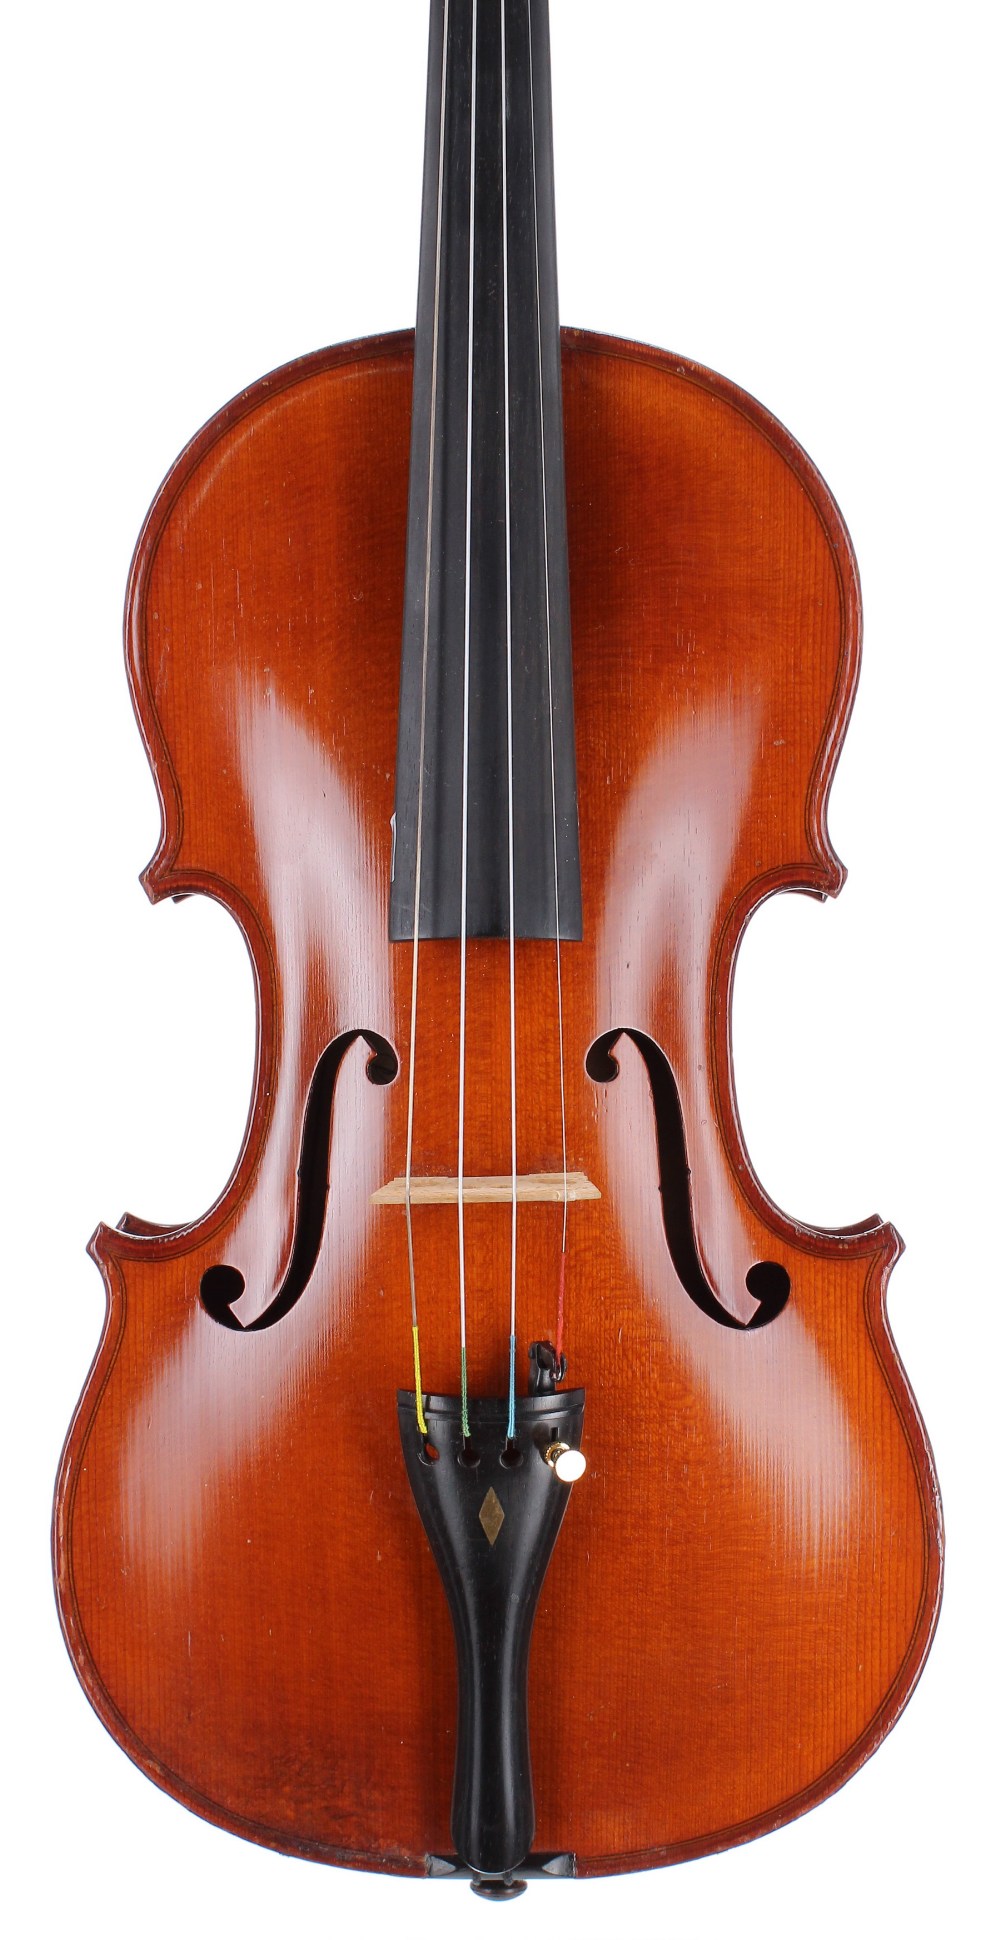 French violin by and labelled Paul Mangenot, Mirecourt (France), the two piece back of medium curl